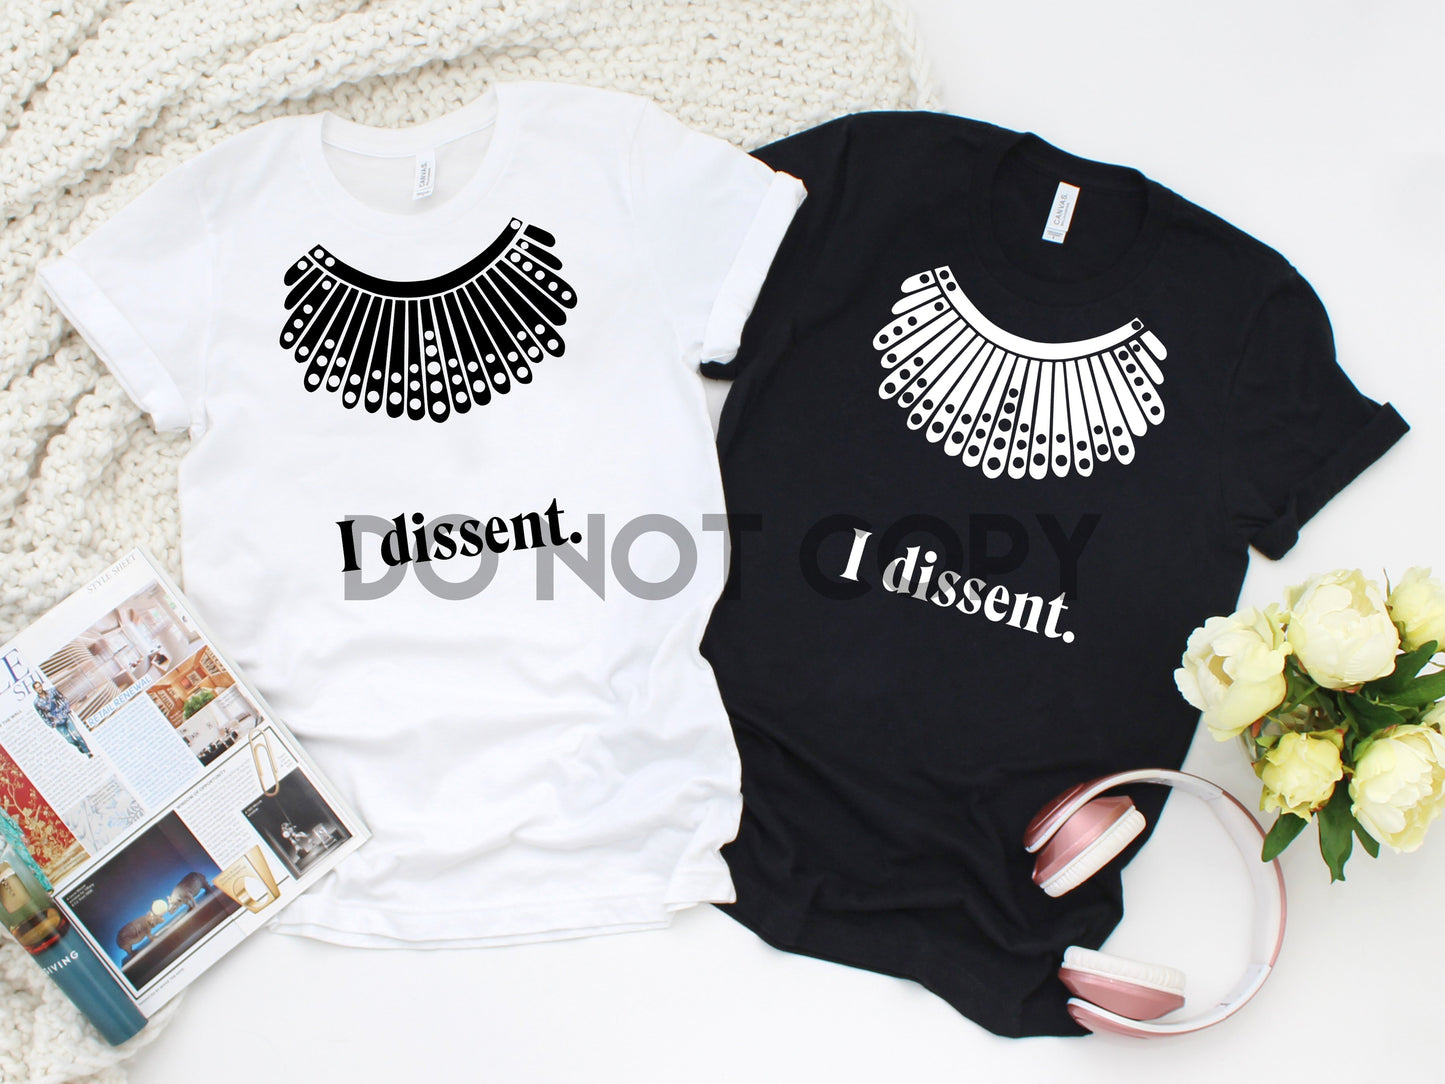 I dissent Ginsburg RBG Collar white black or rose gold ink one color Screen print transfer